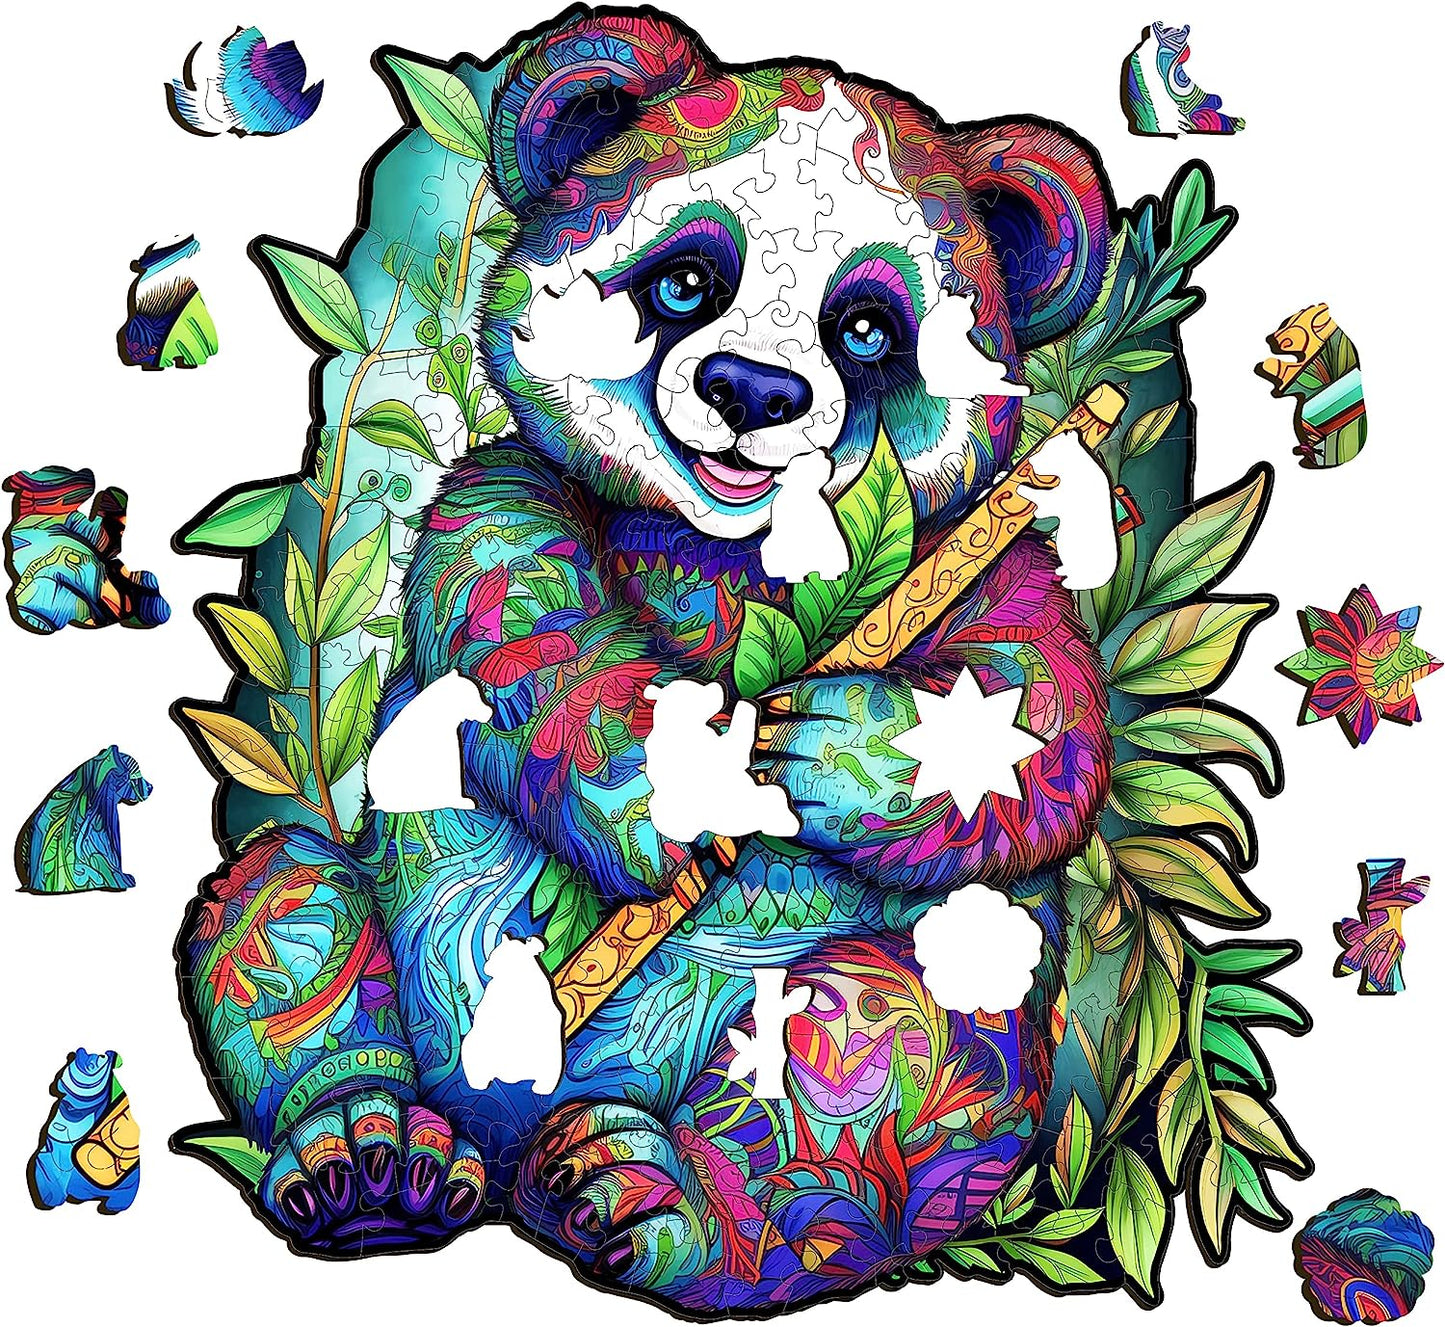 Wooden Puzzle for Adults, 12.2 * 10.5in Wooden Puzzles with Unique Colors and Shapes, Wooden Jigsaw Puzzle Perfect for Family Game and Gifts(Panda-160pcs-170pcs)